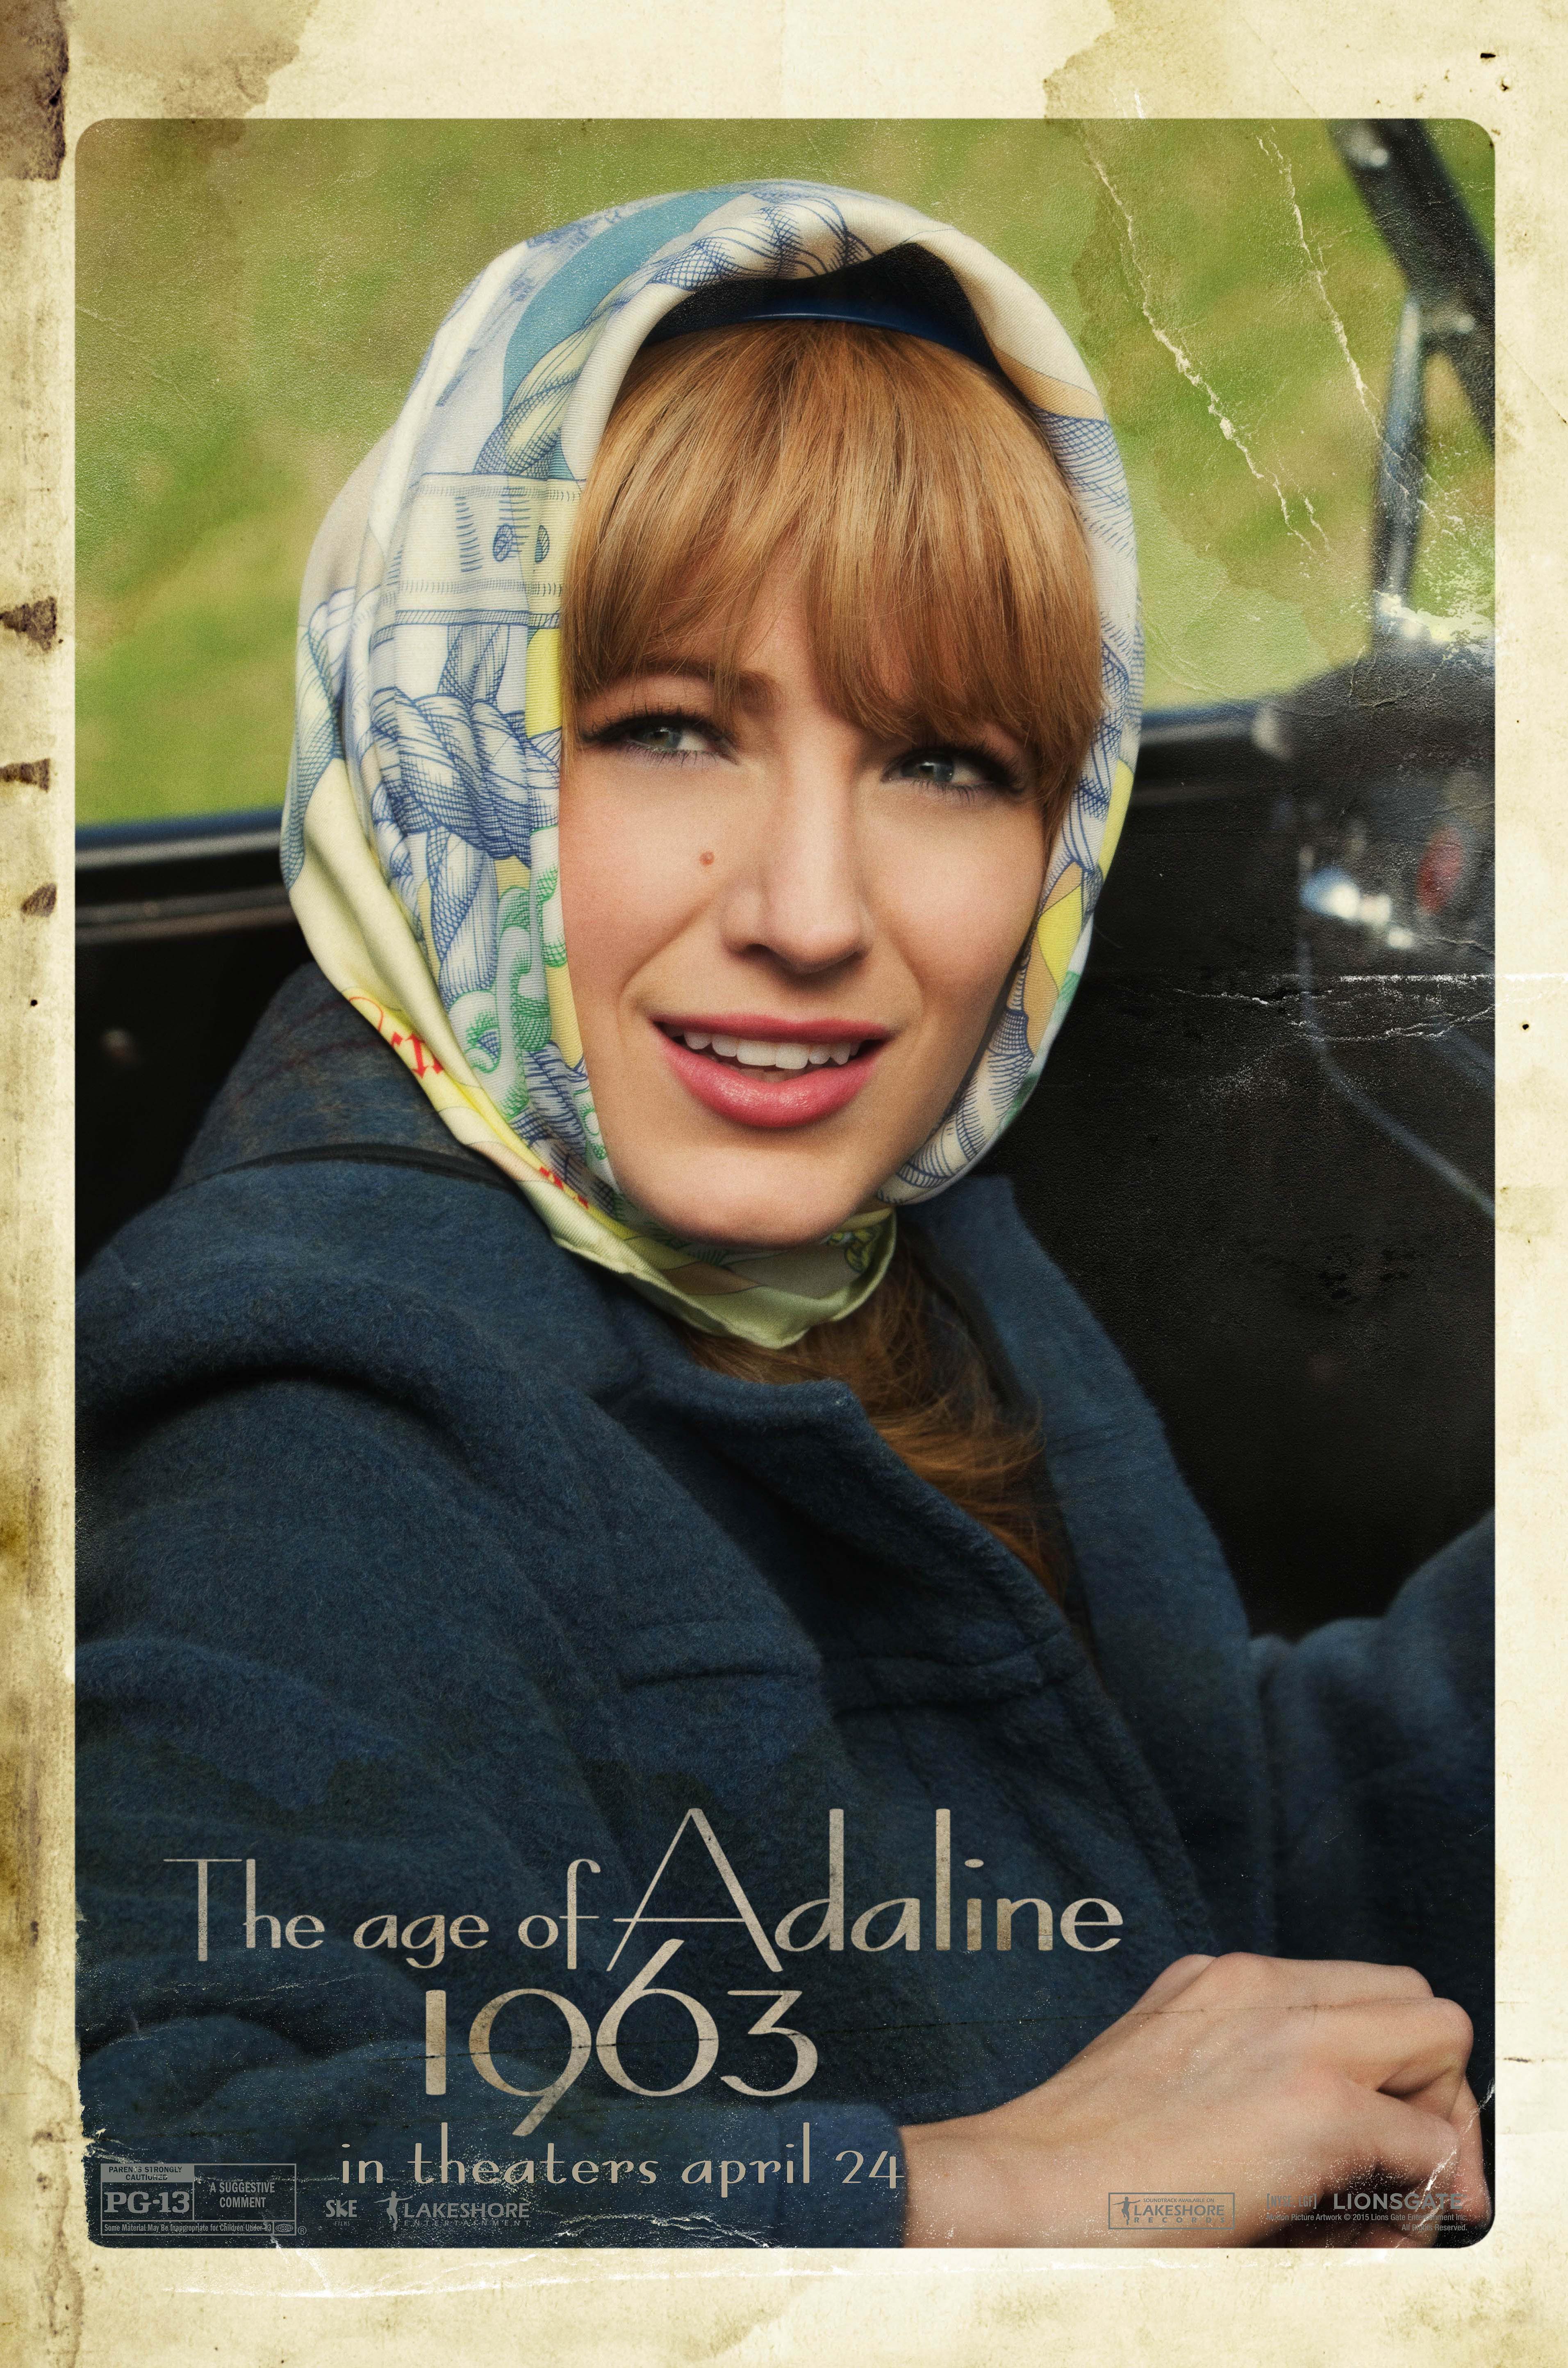 Blake Lively in The Age of Adaline